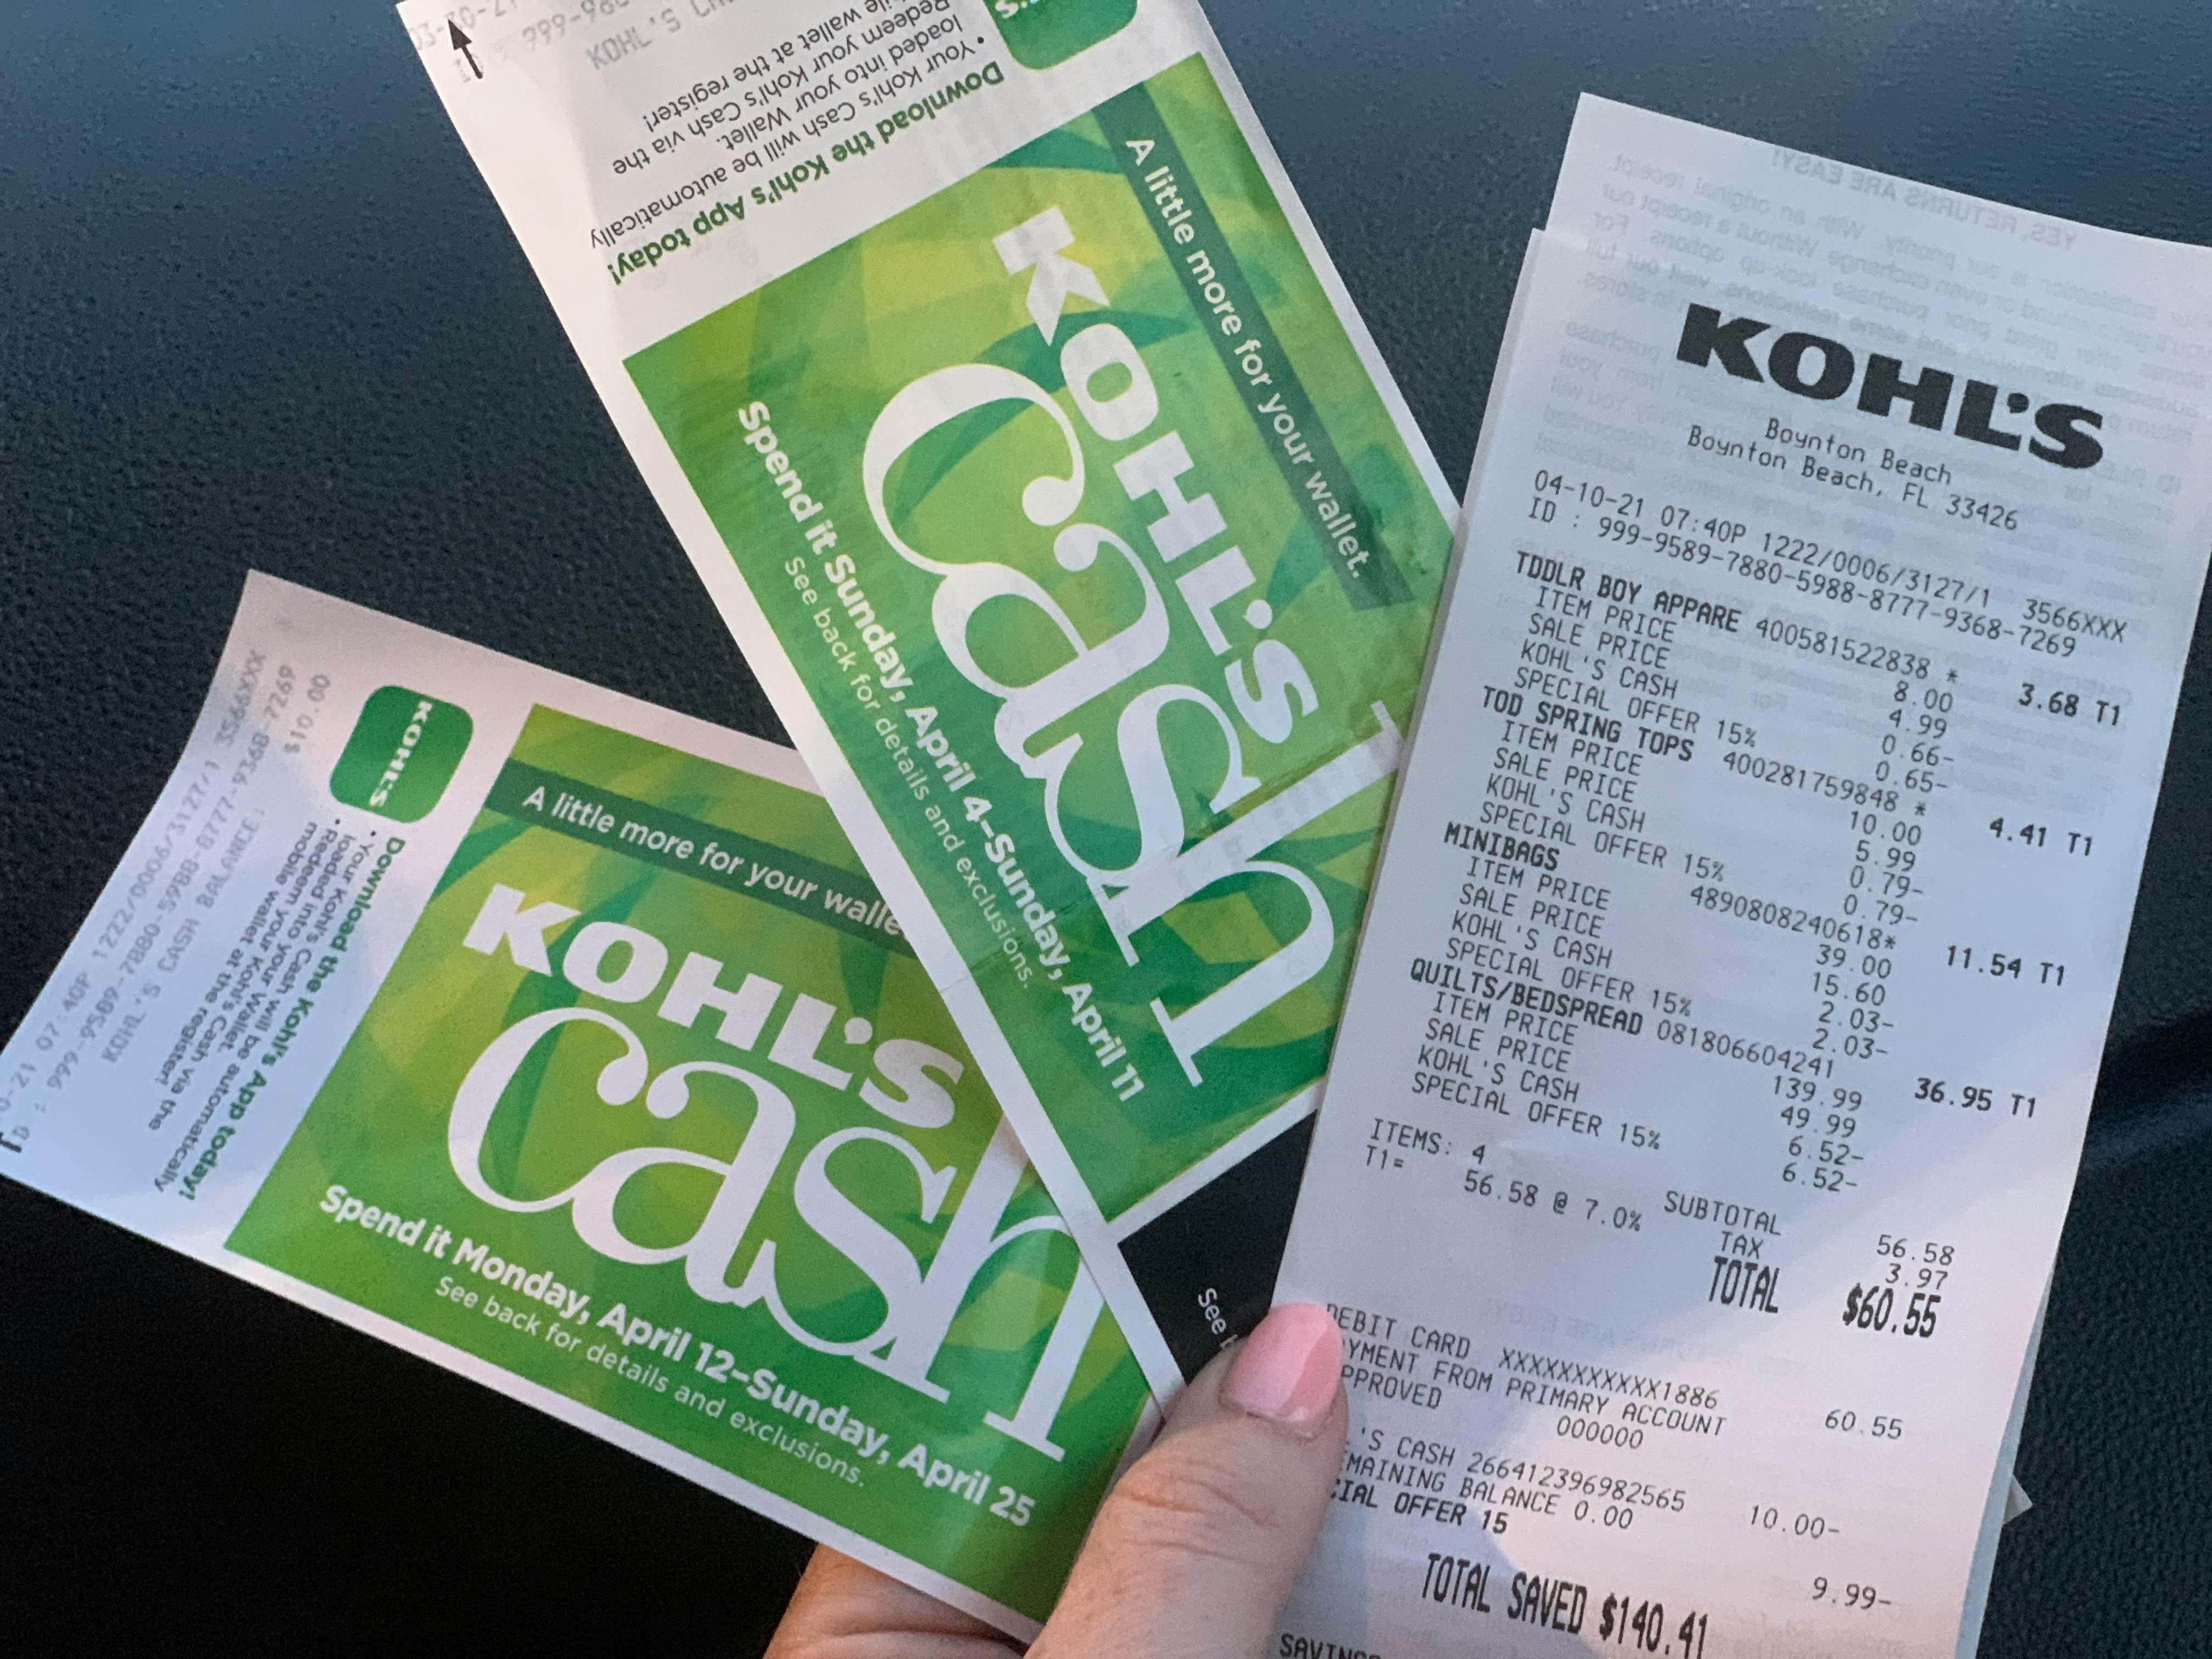 Three Days Only: Get $15 Kohl's Cash for Every $48 You Spend